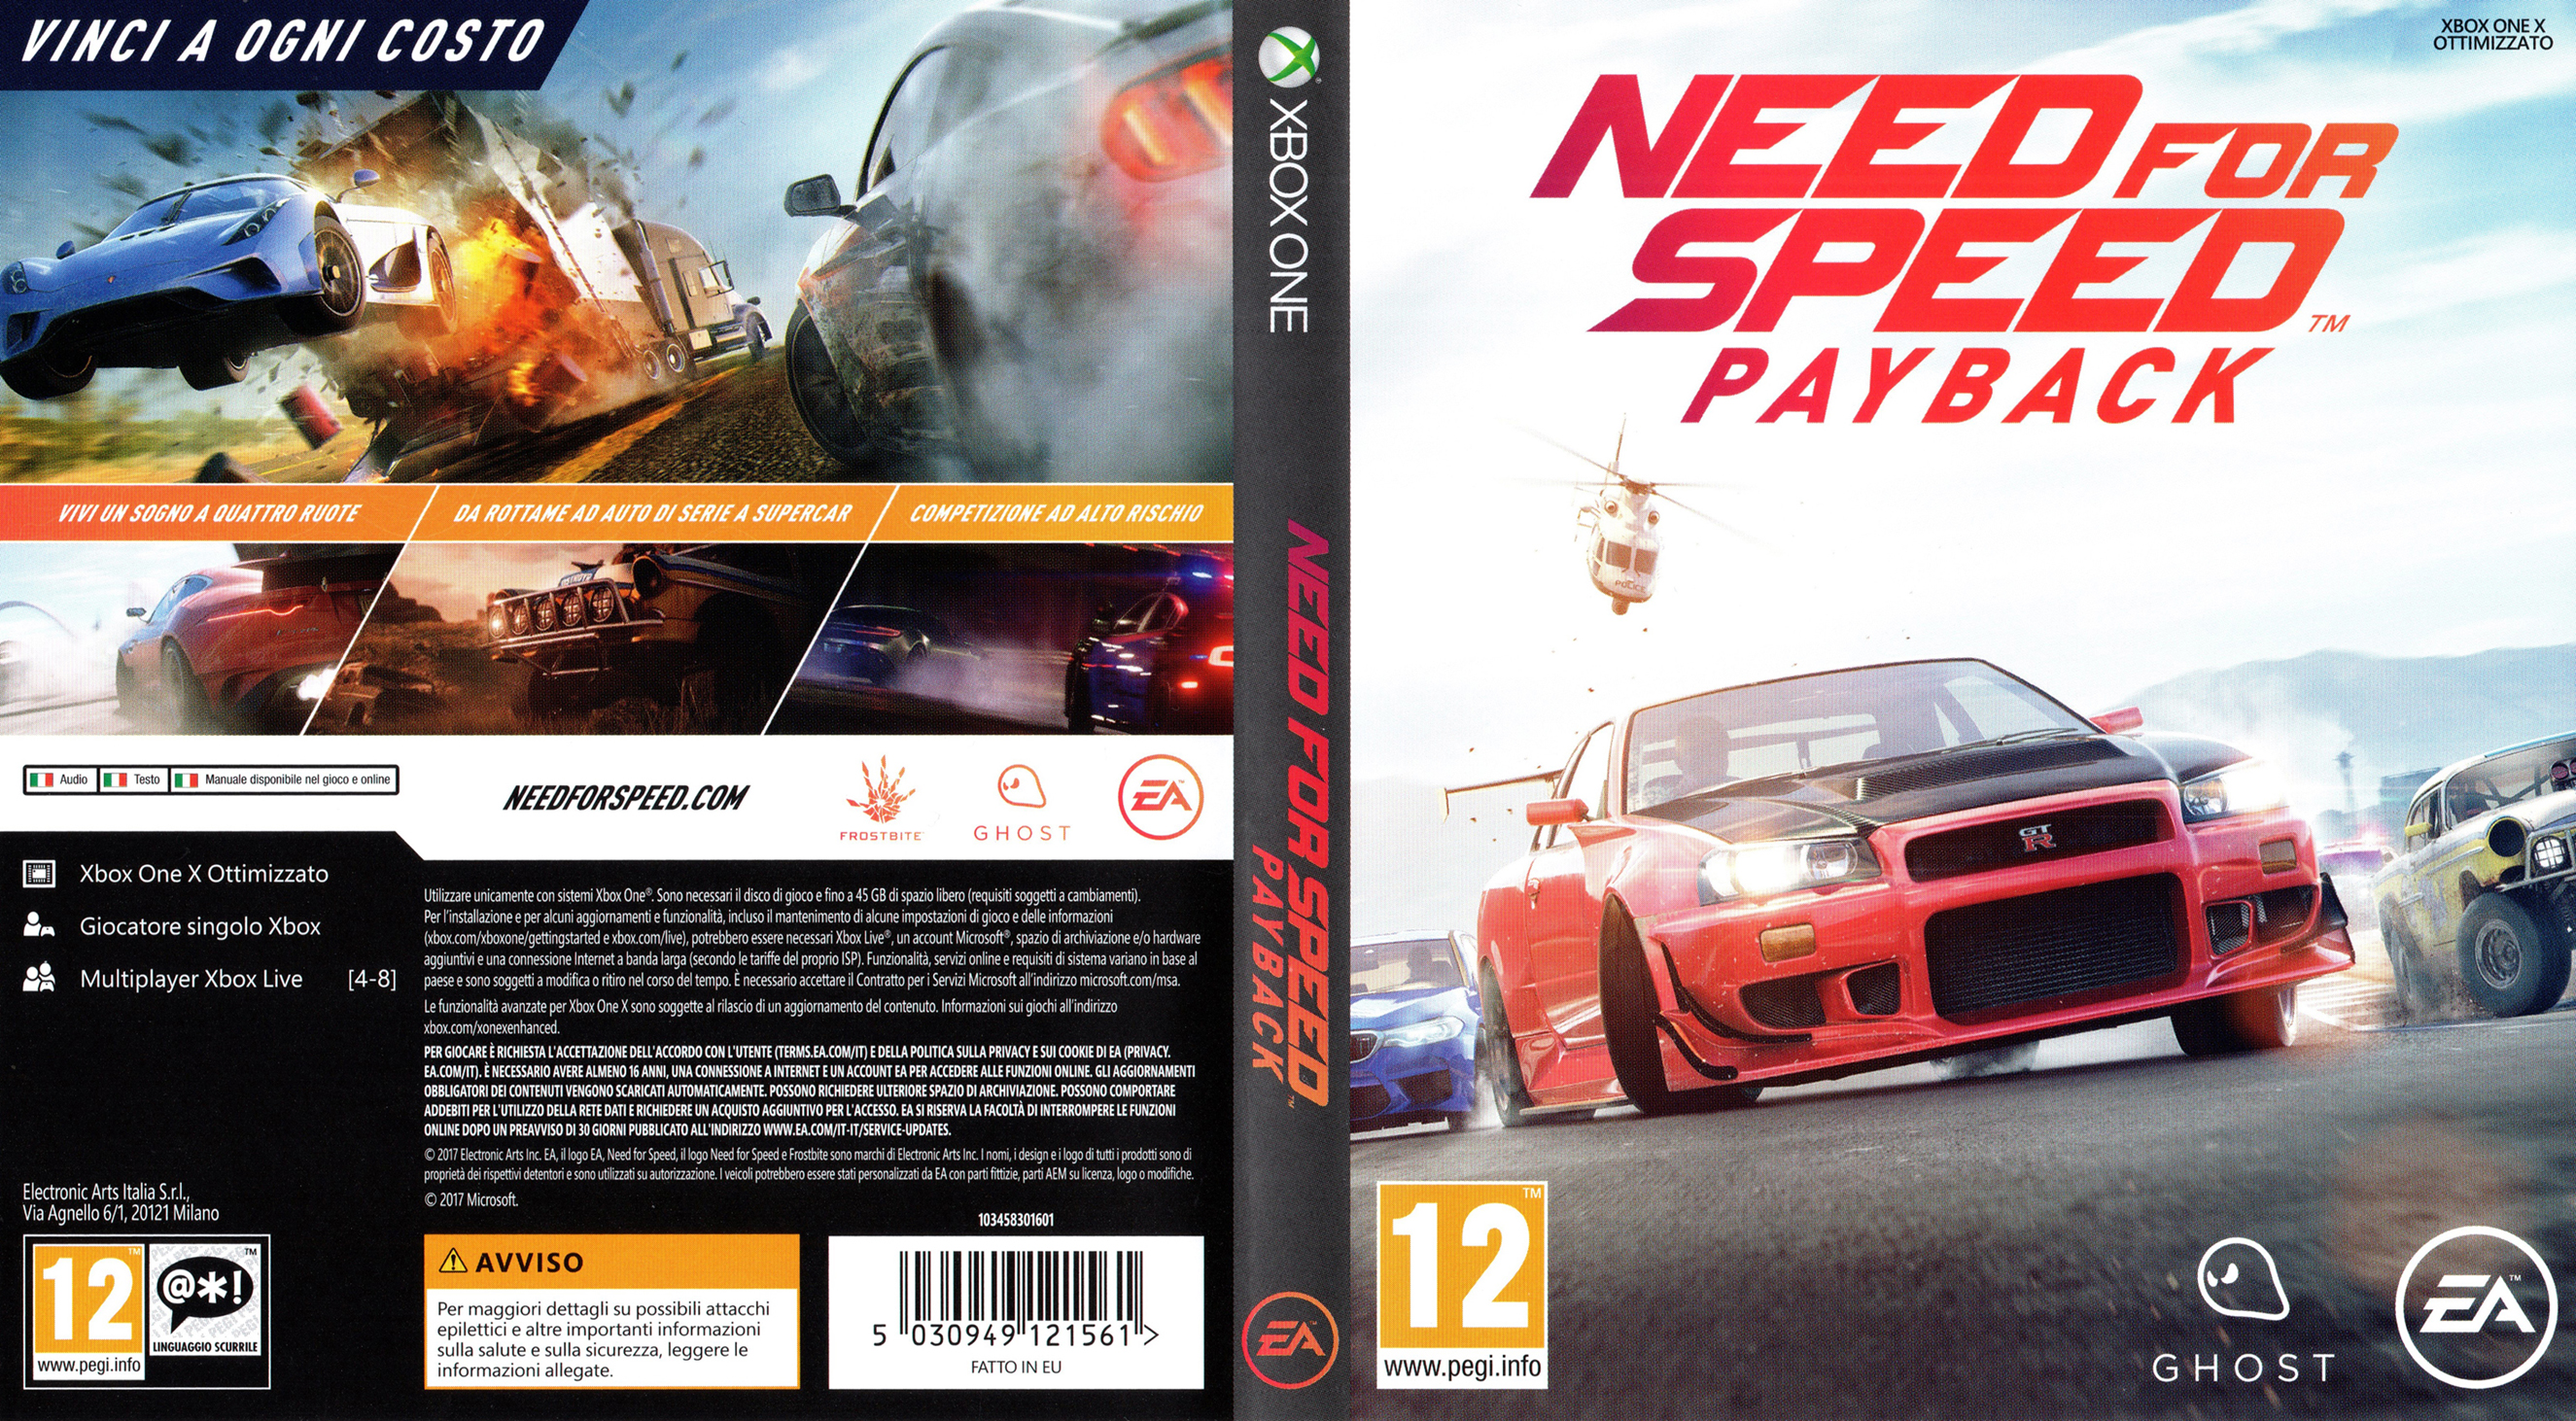 Nfs payback ps4. Xbox 360 need for Speed коробка. Need for Speed Payback ps4 диск. Need for Speed Payback (ps4). Need for Speed Payback диск Xbox one.